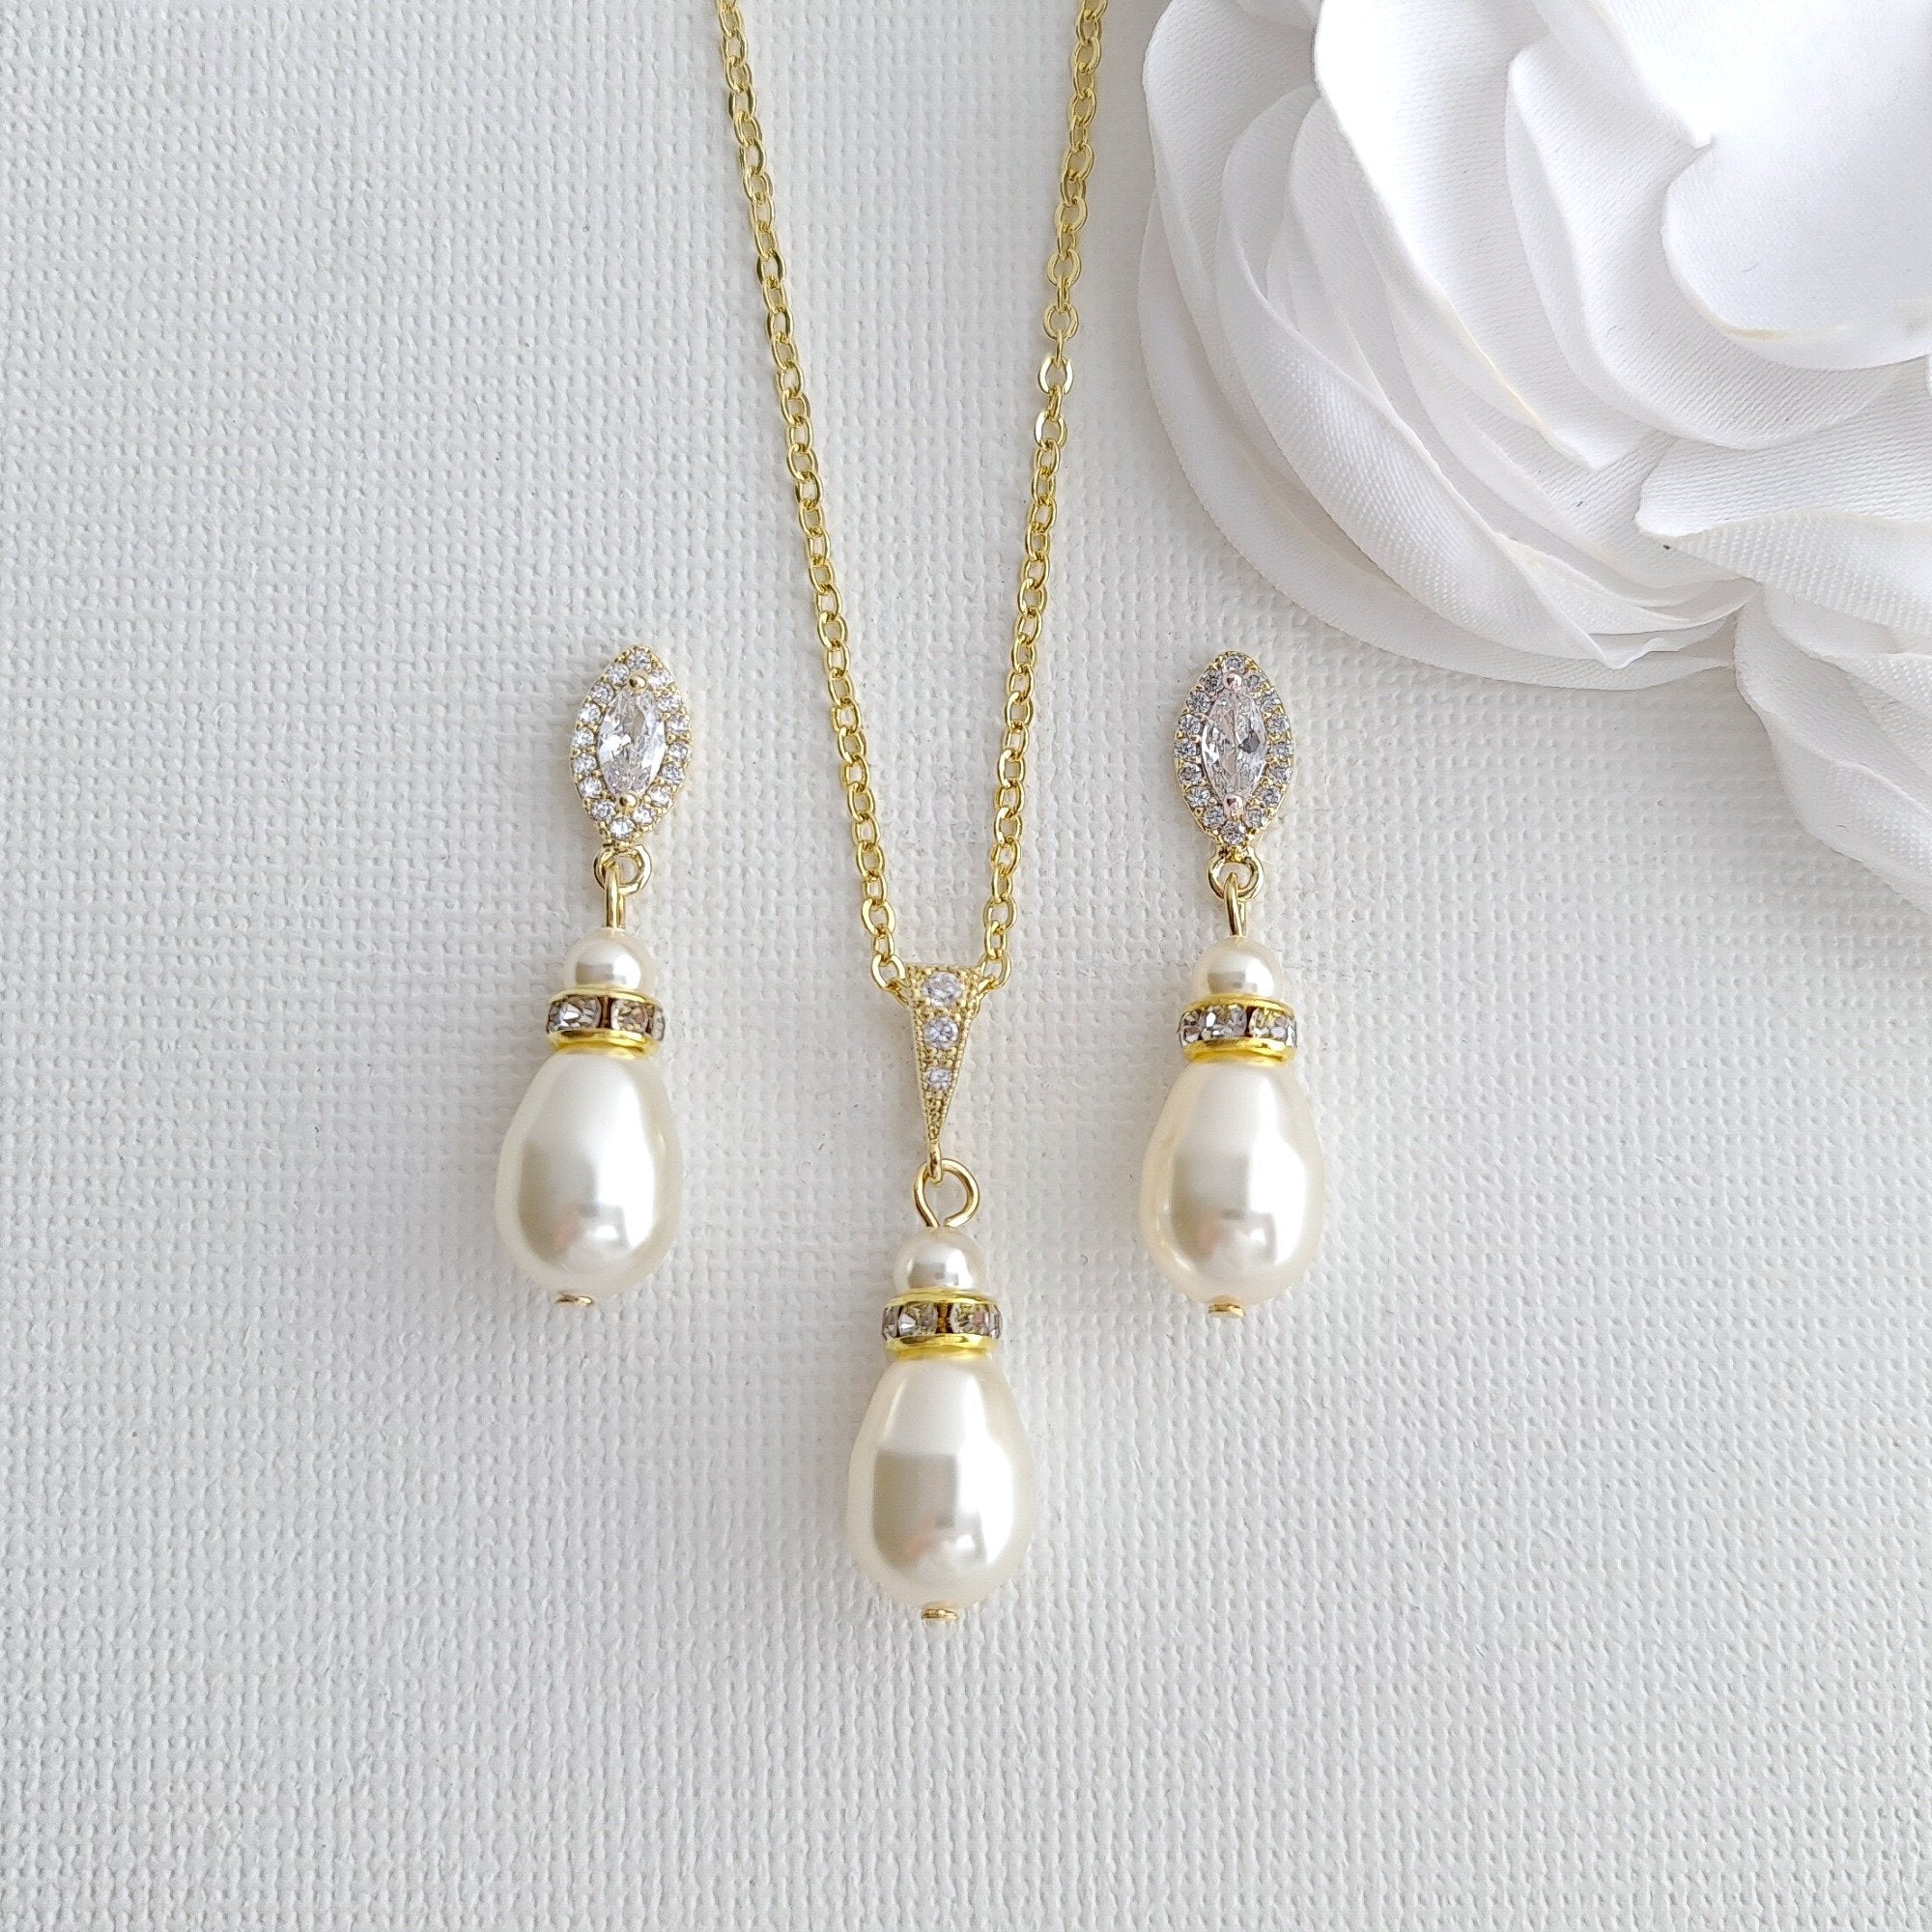 Ethereal Bouquet Pearl & Sterling Silver Necklace/Earrings Set - Holly J  Carter Fine Art Metals & Jewelry